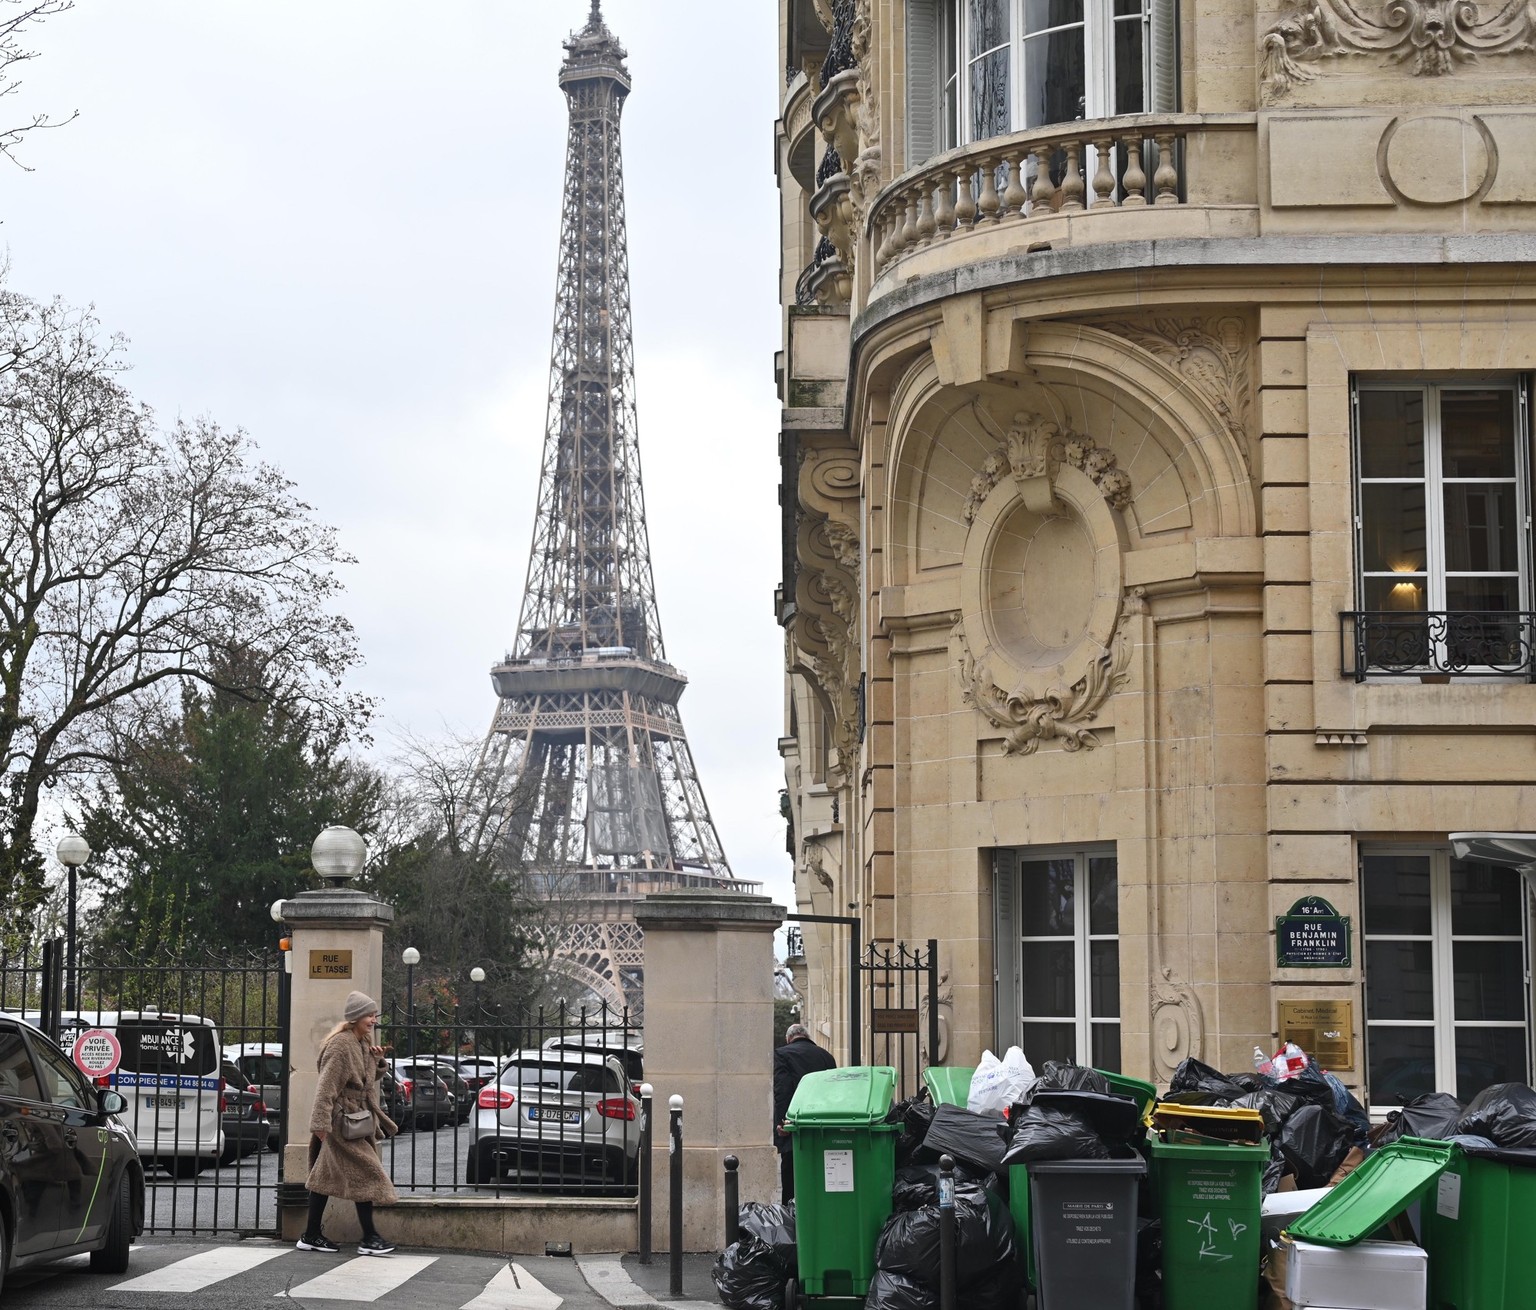 PARIS, FRANCE - MARCH 13: Garbage cans overflowing with trash on the streets as collectors go on strike in Paris, France on March 13, 2023. Garbage collectors have joined the massive strikes throughou ...